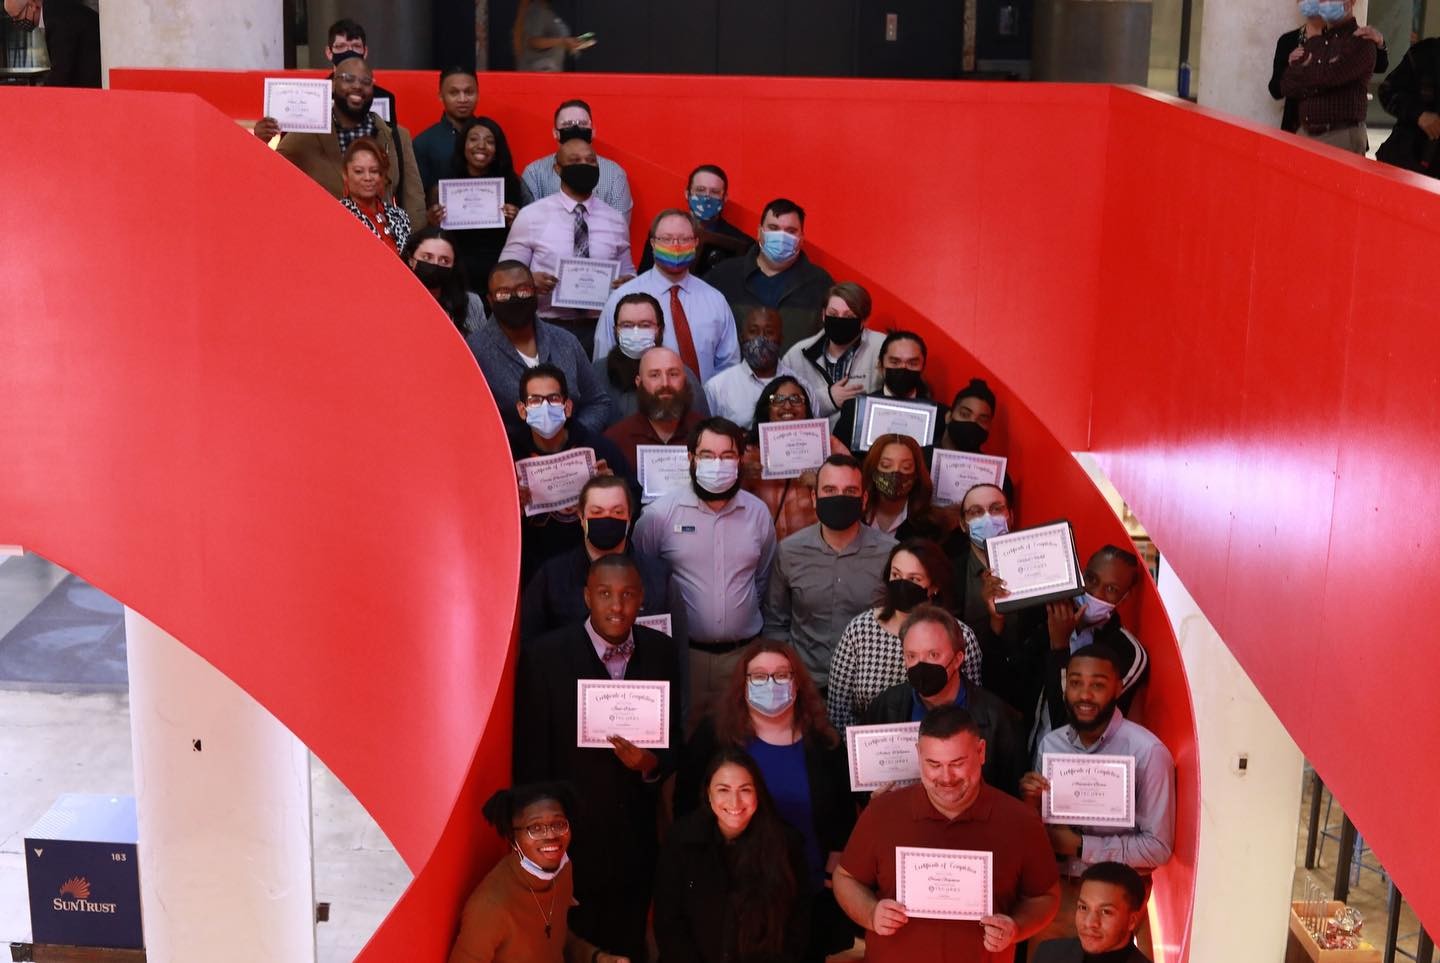 A group of Tech901 graduates posing in front of a red staircase.